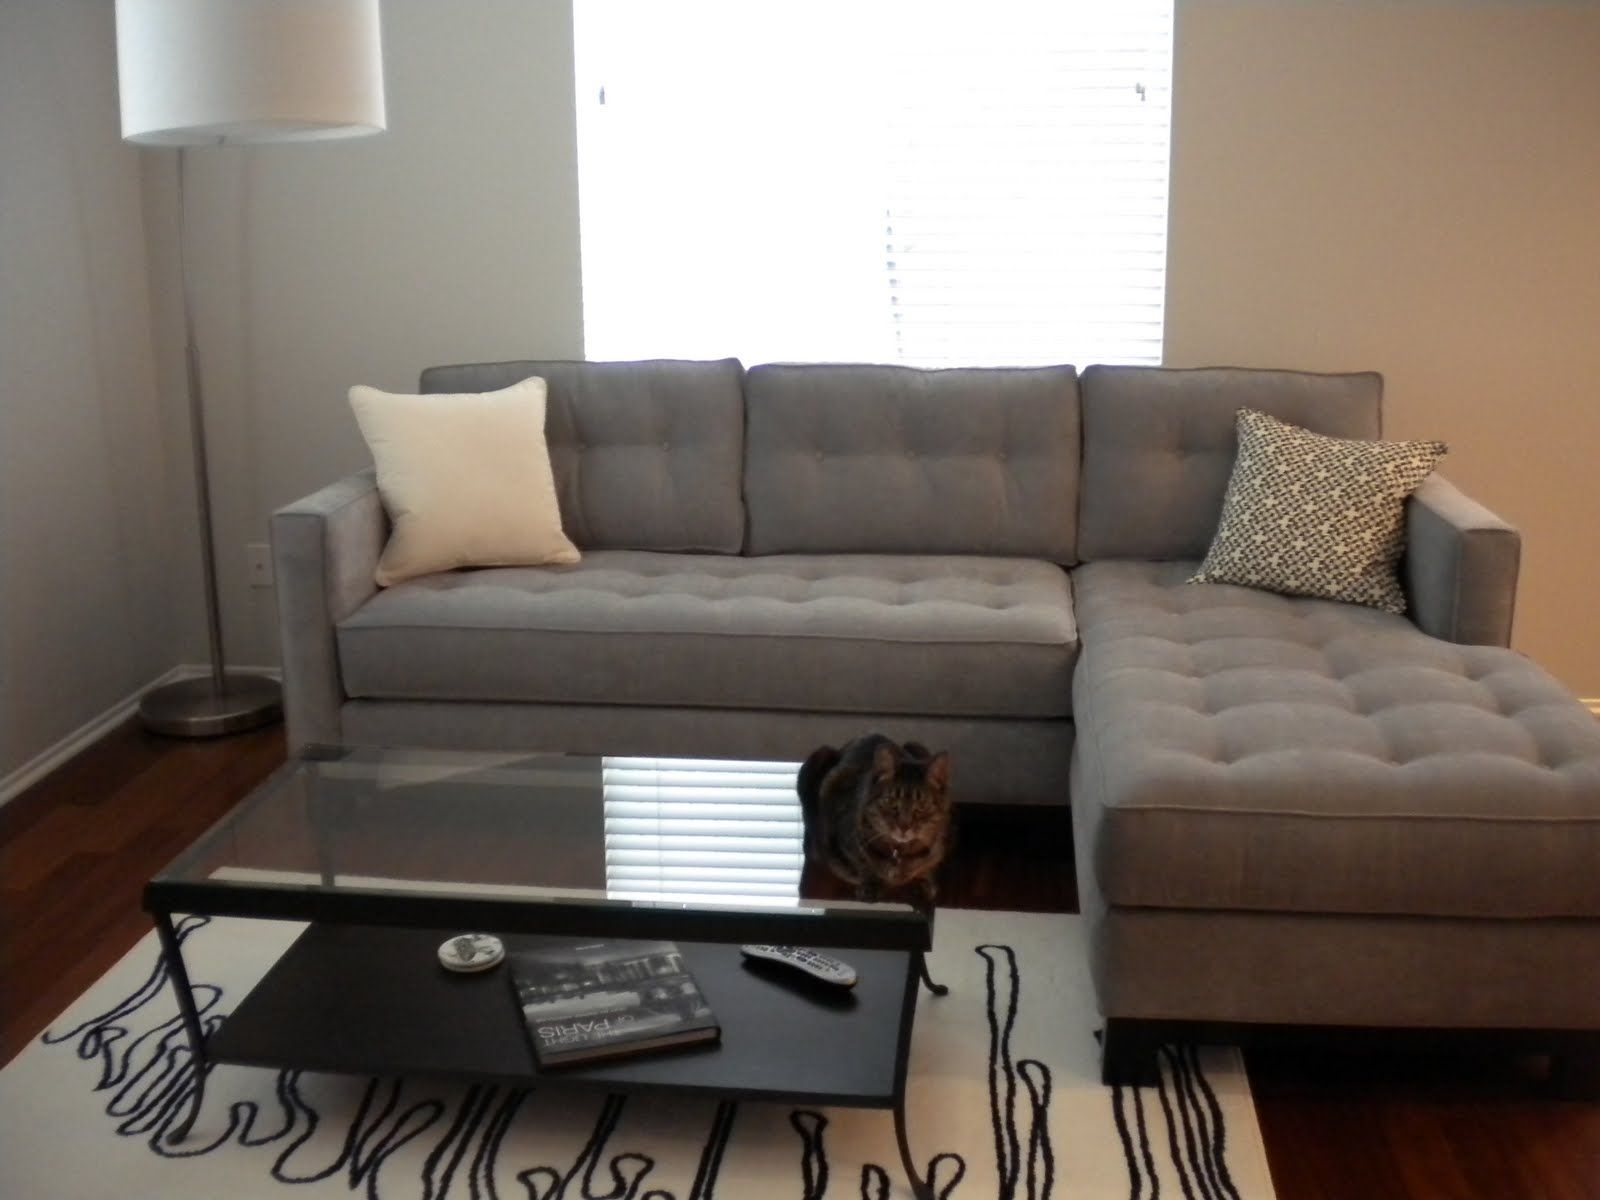 Furniture : Couchtuner Season 2 Sectional Couch With Storage Regarding Greenville Sc Sectional Sofas (Photo 3 of 10)